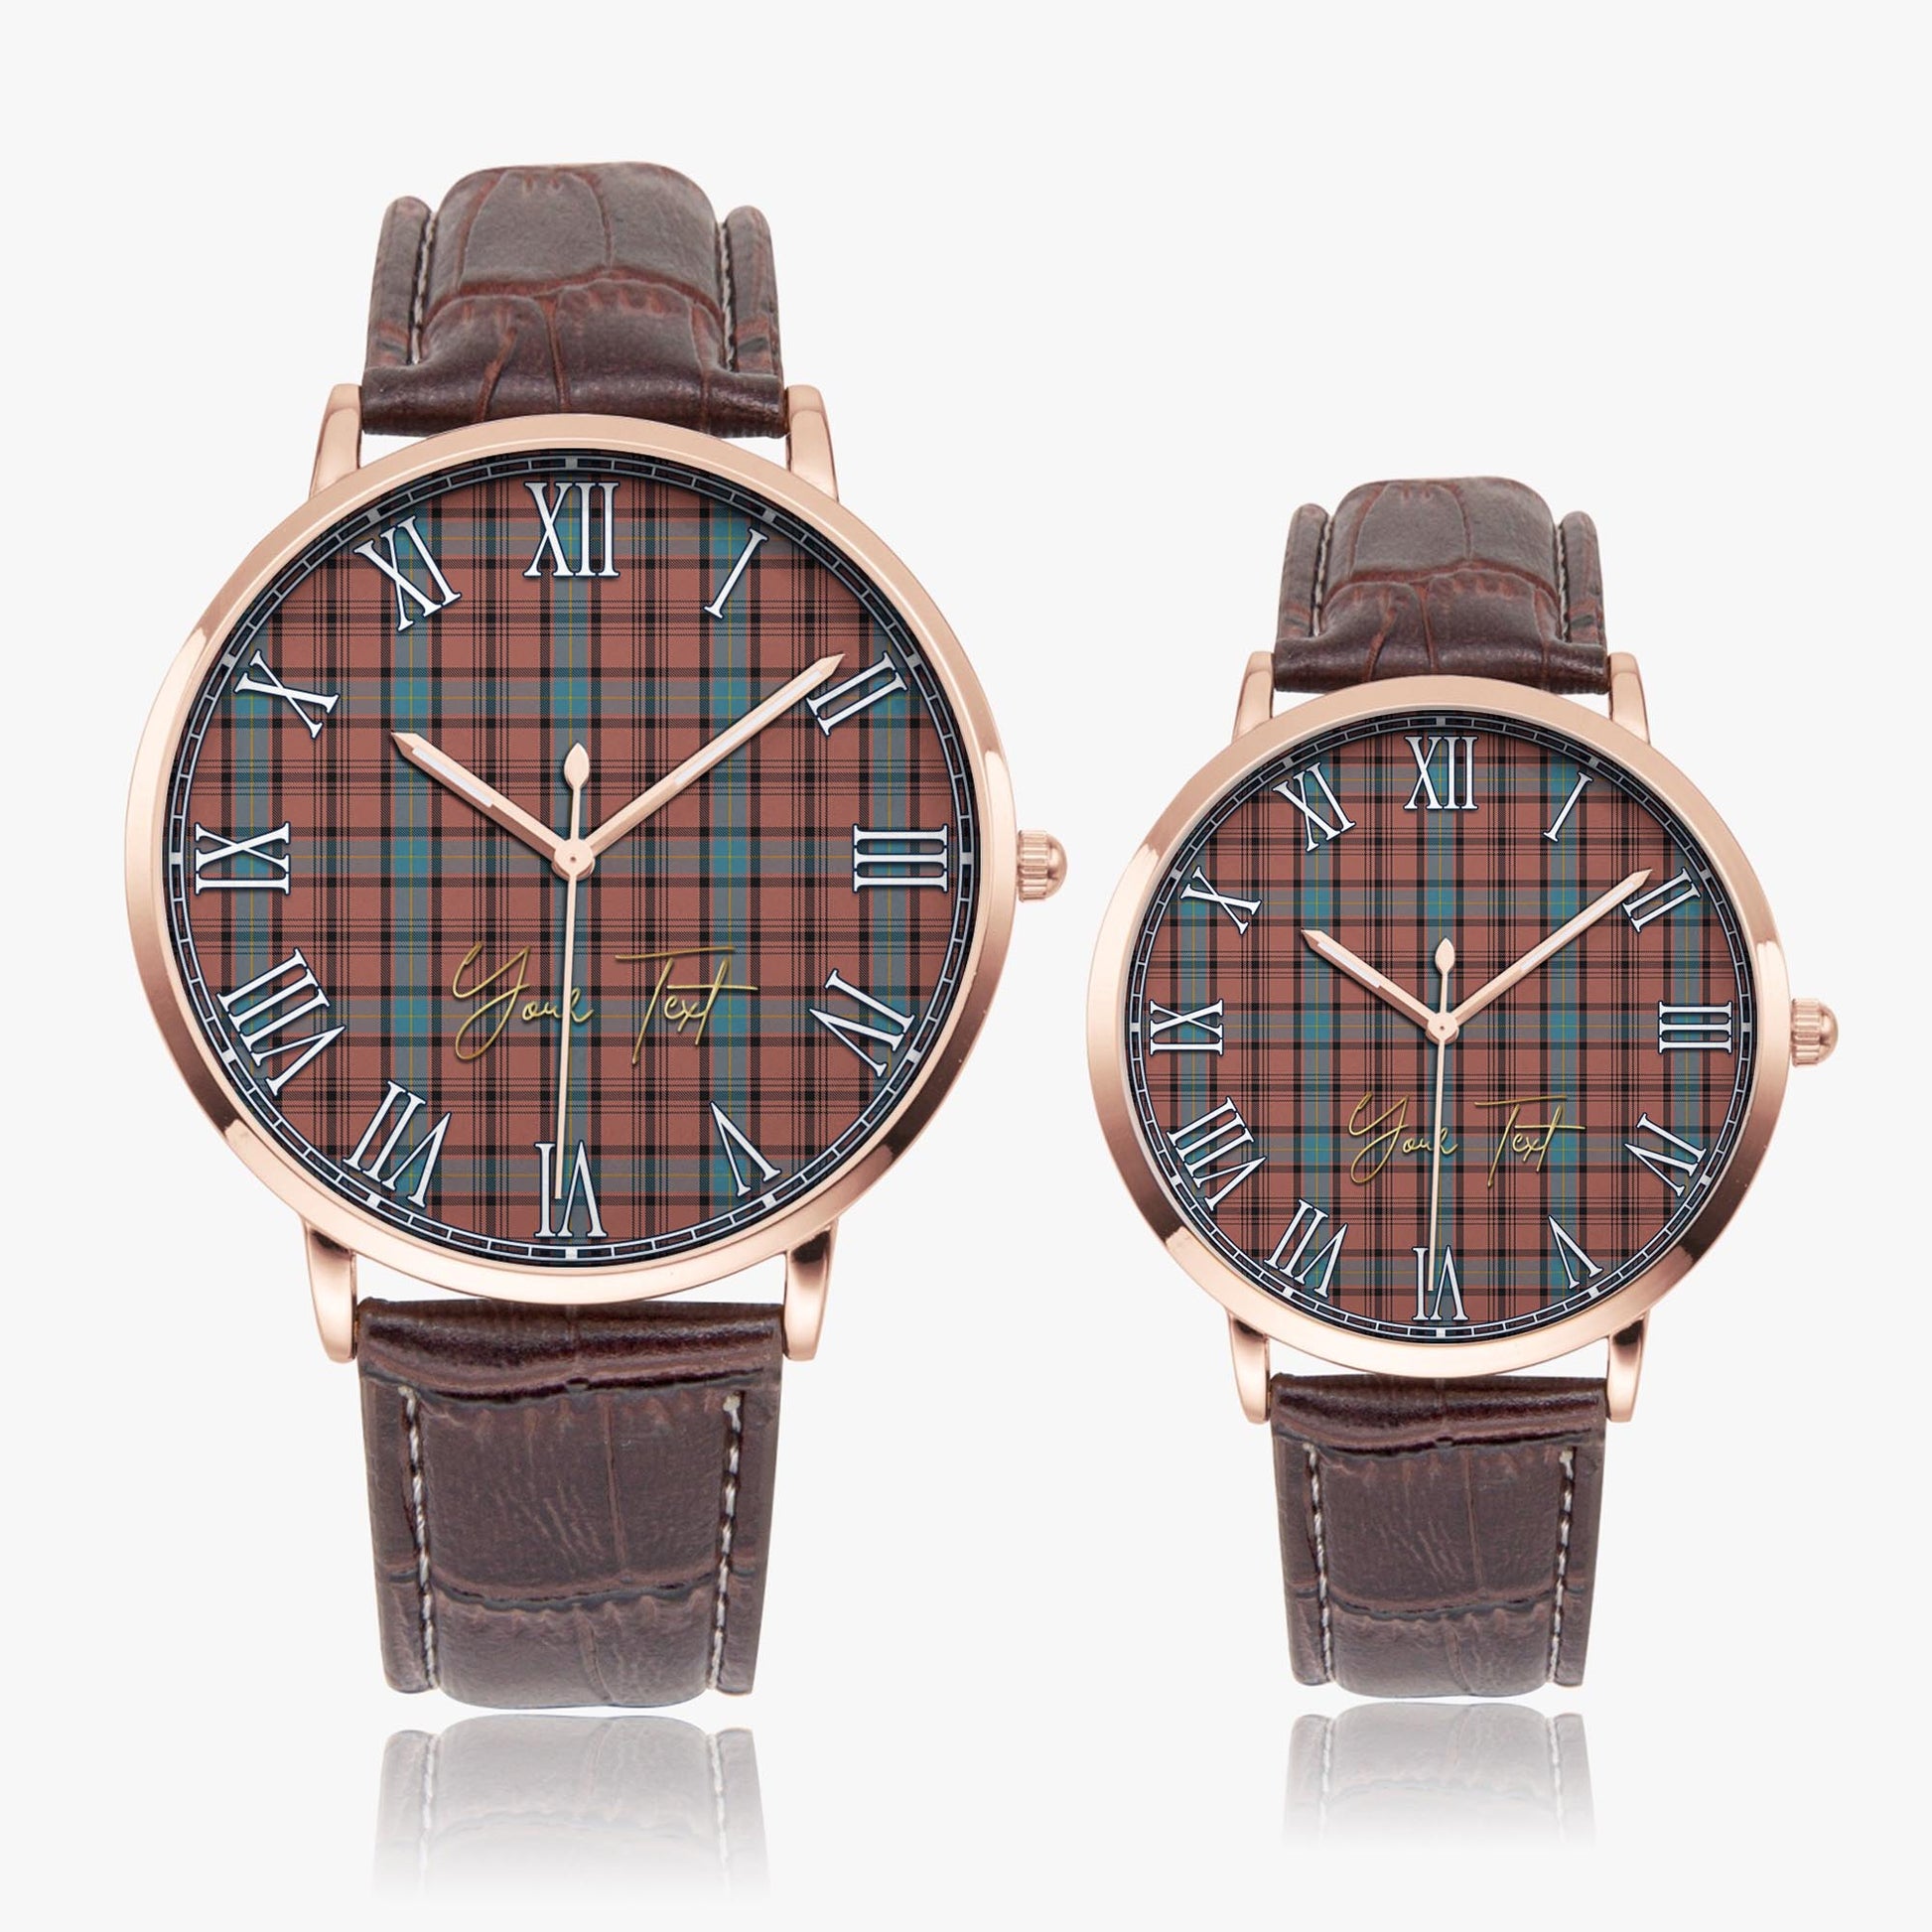 Hannay Dress Tartan Personalized Your Text Leather Trap Quartz Watch Ultra Thin Rose Gold Case With Brown Leather Strap - Tartanvibesclothing